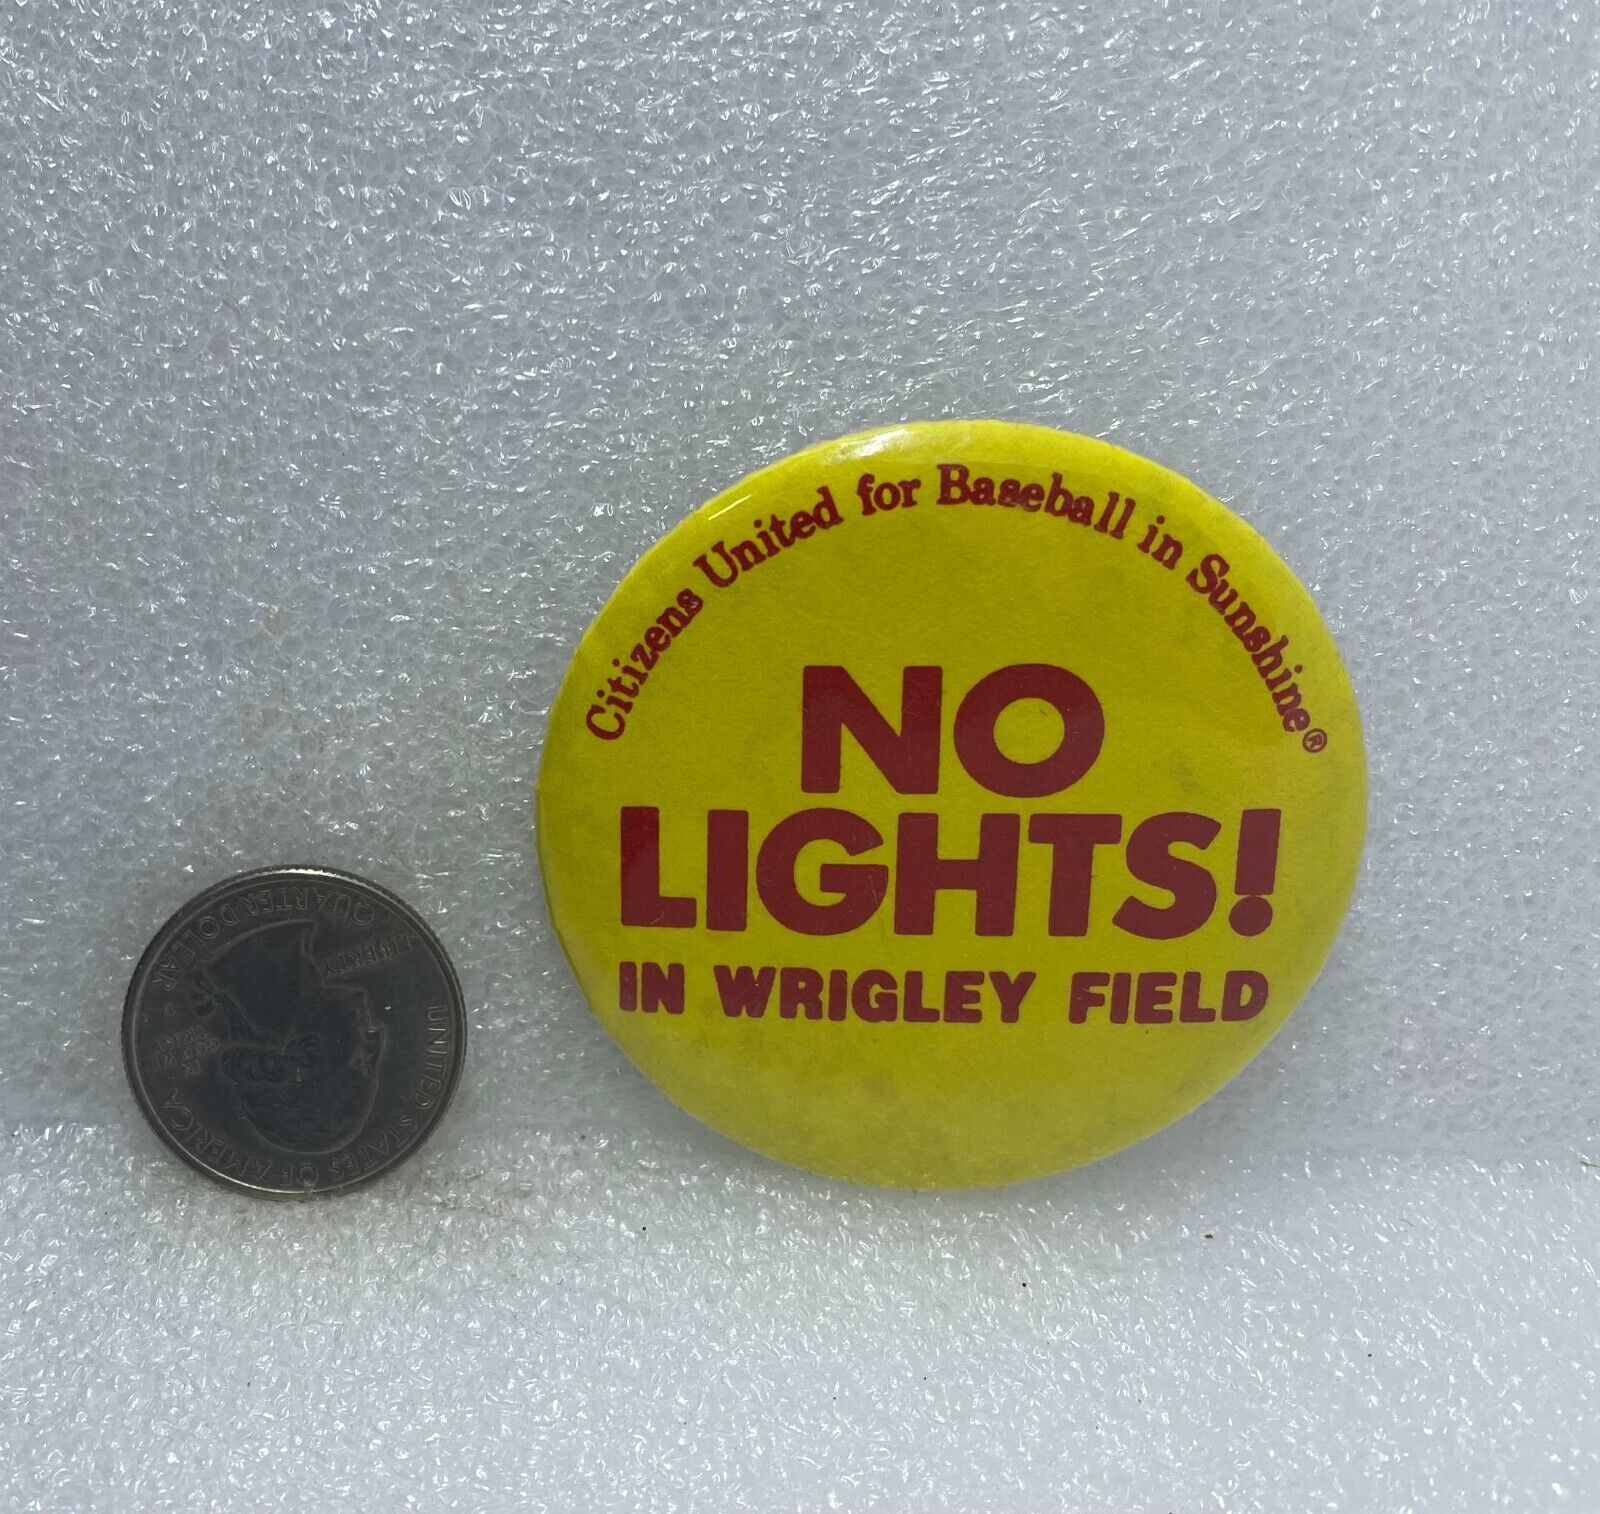 Citizens United For Baseball In Sunshine - No Lights In Wrigley Field Pin